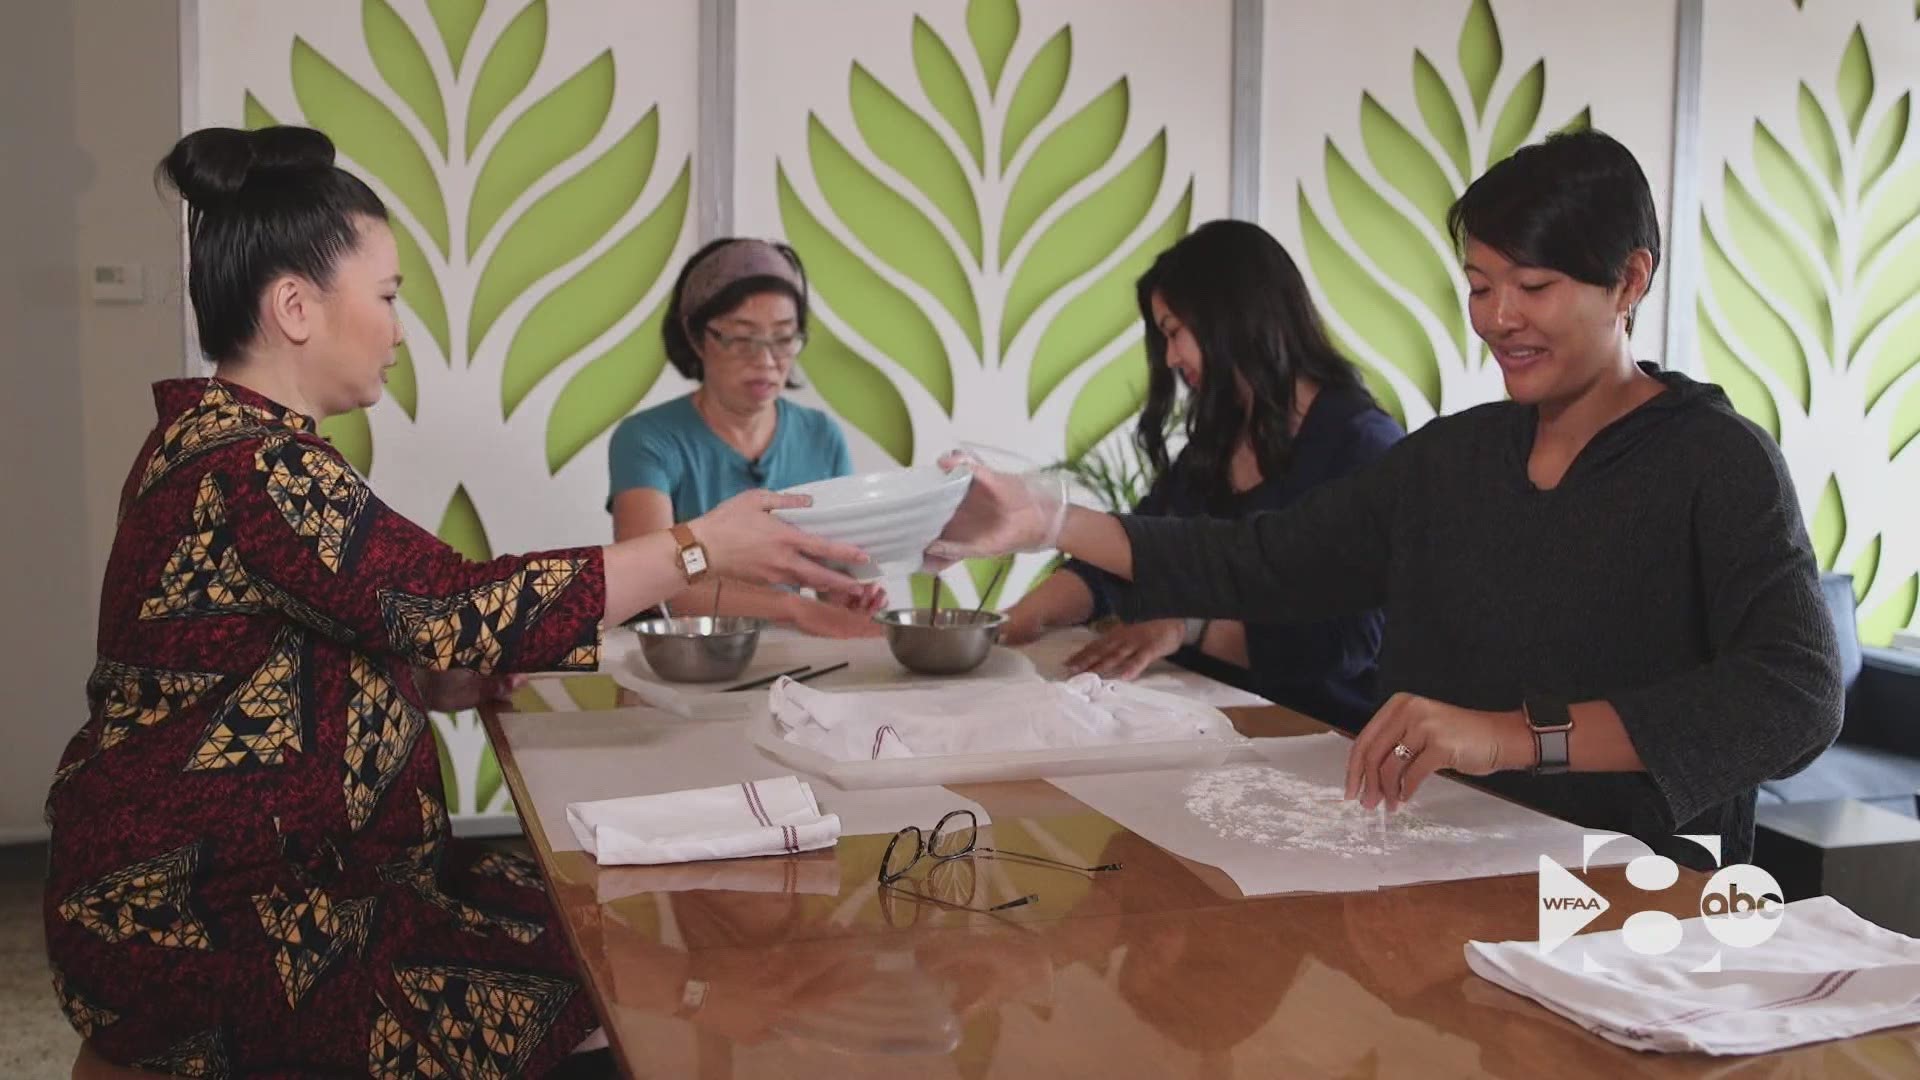 On a Sunday morning over dumplings, three women sat down to discuss the issues in Asian American communities, and manageable ways to stop hate.